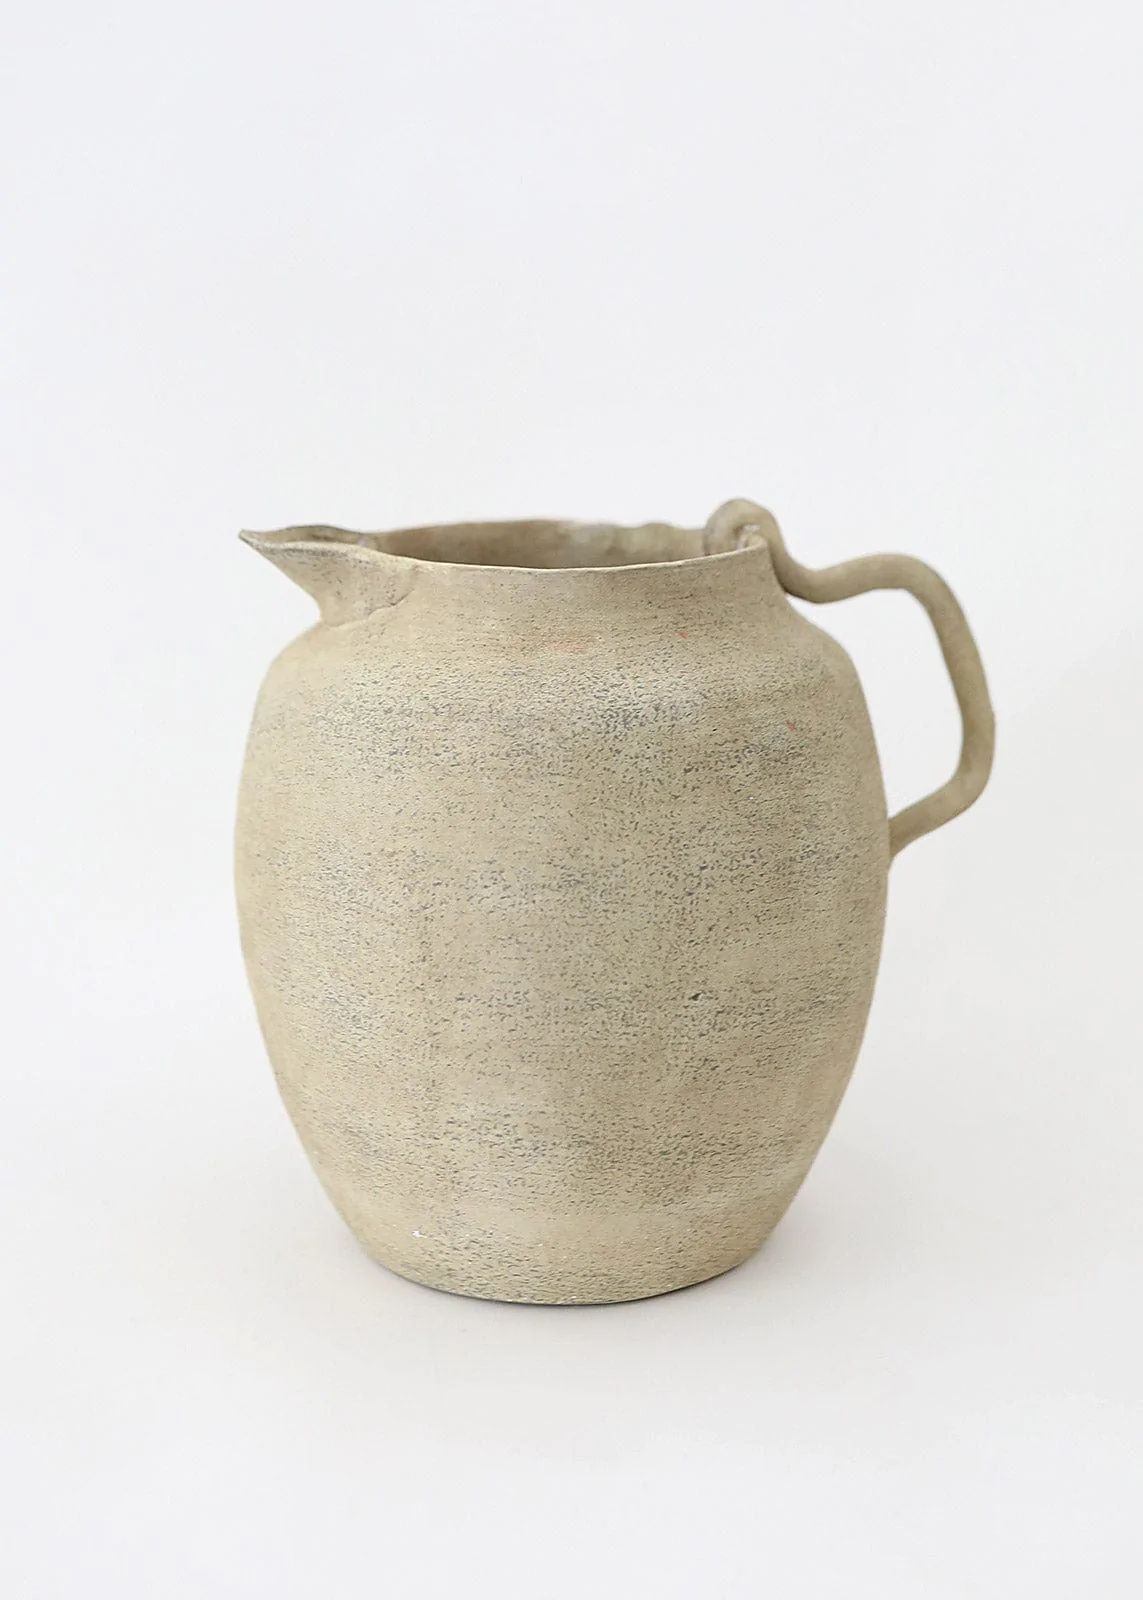 Neutral Distressed Ceramic Pitcher Vase with Handle - 8.5" Tall | Afloral (US)